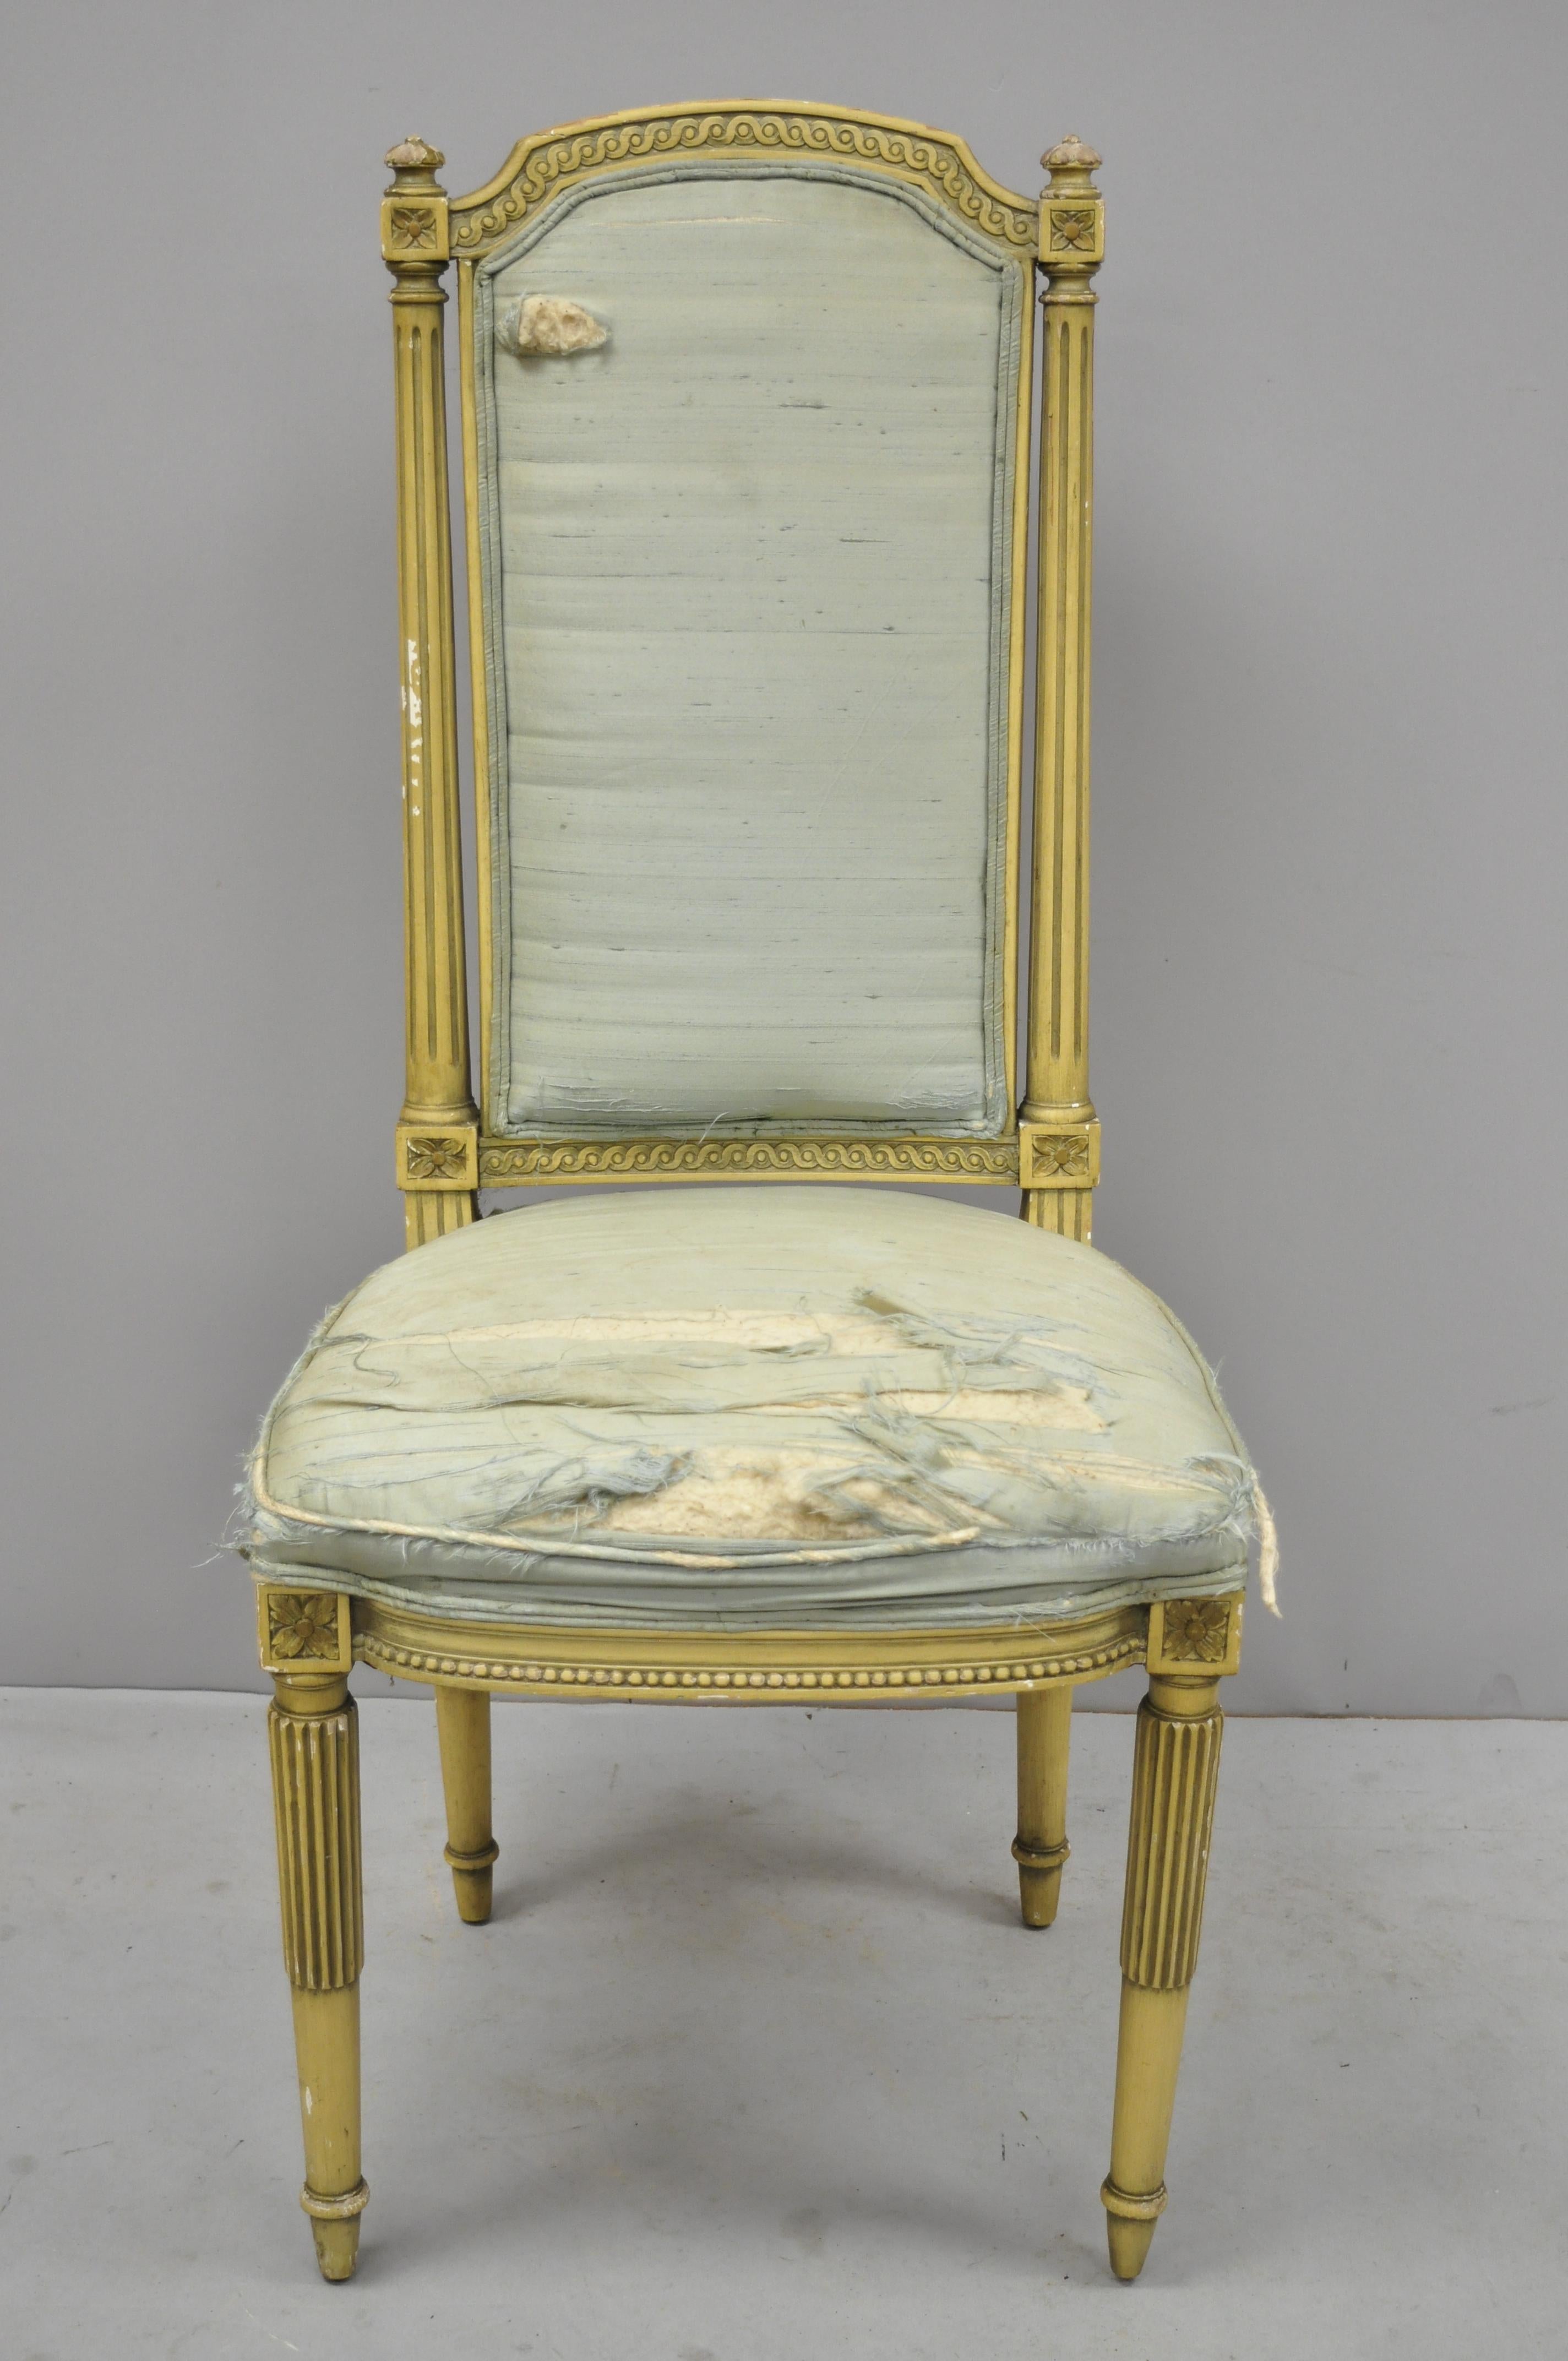 Vintage French Louis XVI cream distress painted tall back dining side accent chair. Item features solid wood frame, distressed finish, nicely carved details, tapered legs, great style and form, circa early to mid-20th century. Measurements: 43